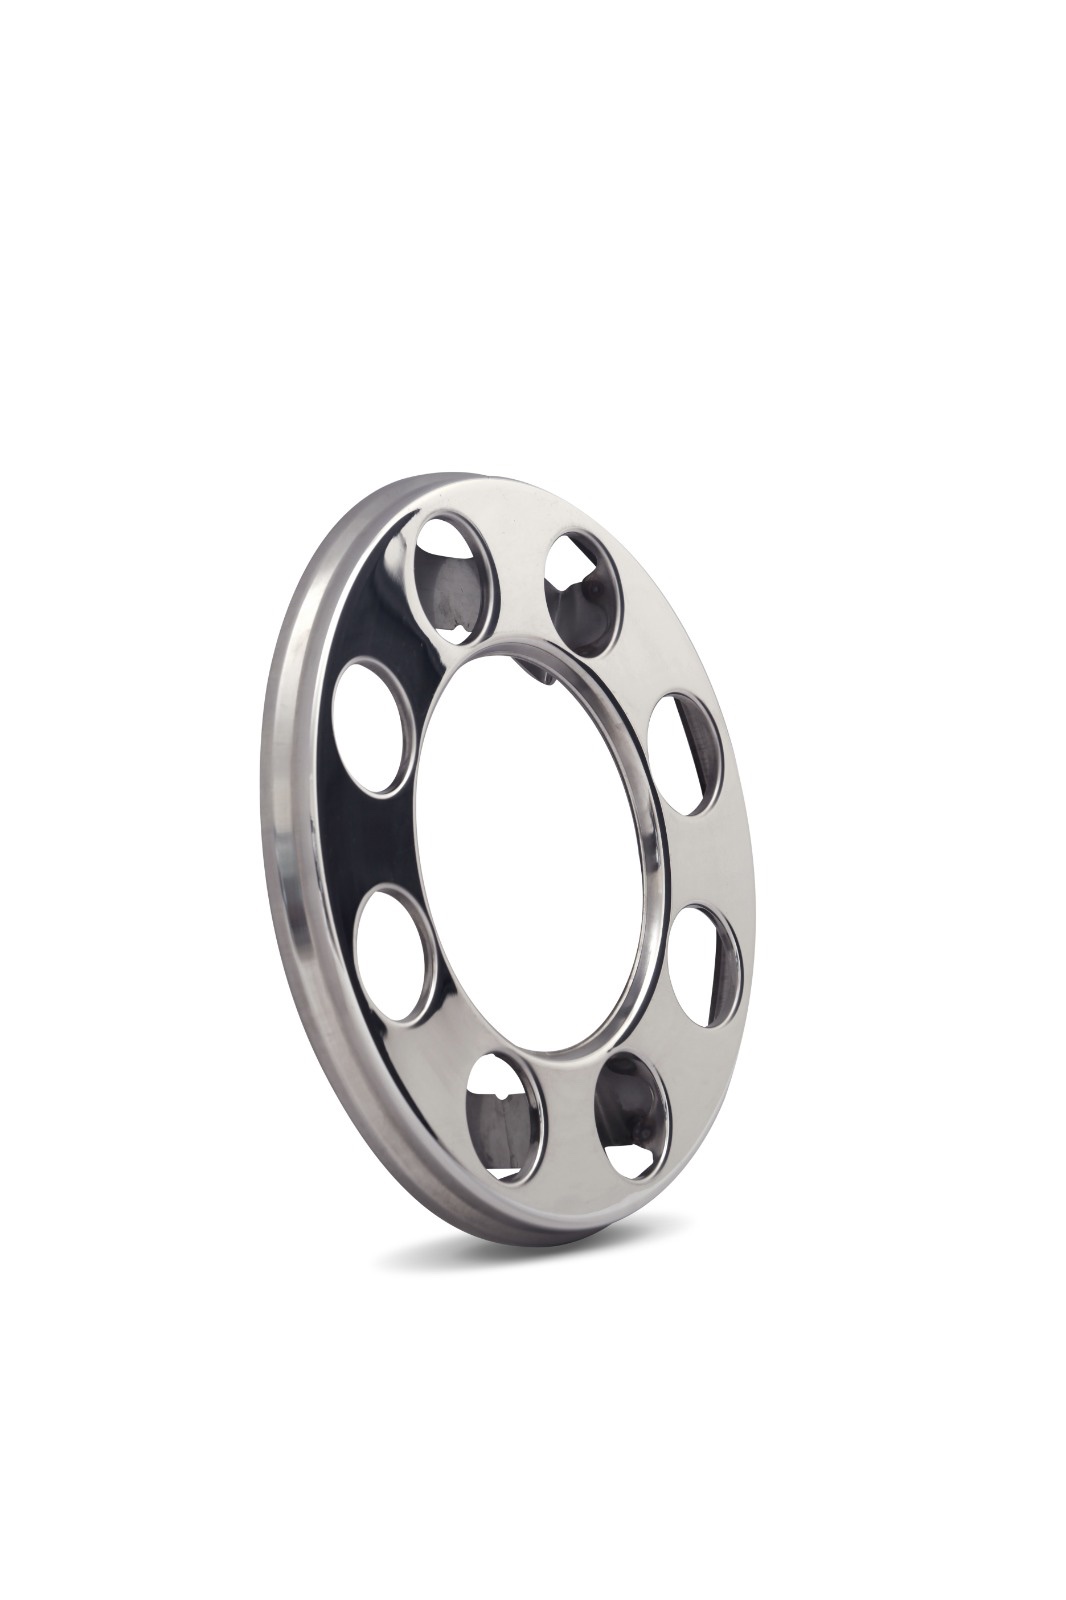 19,5 Stainless Steel Wheel Covers  (8 STUDS) (HOLLOW),Code: C0810/7